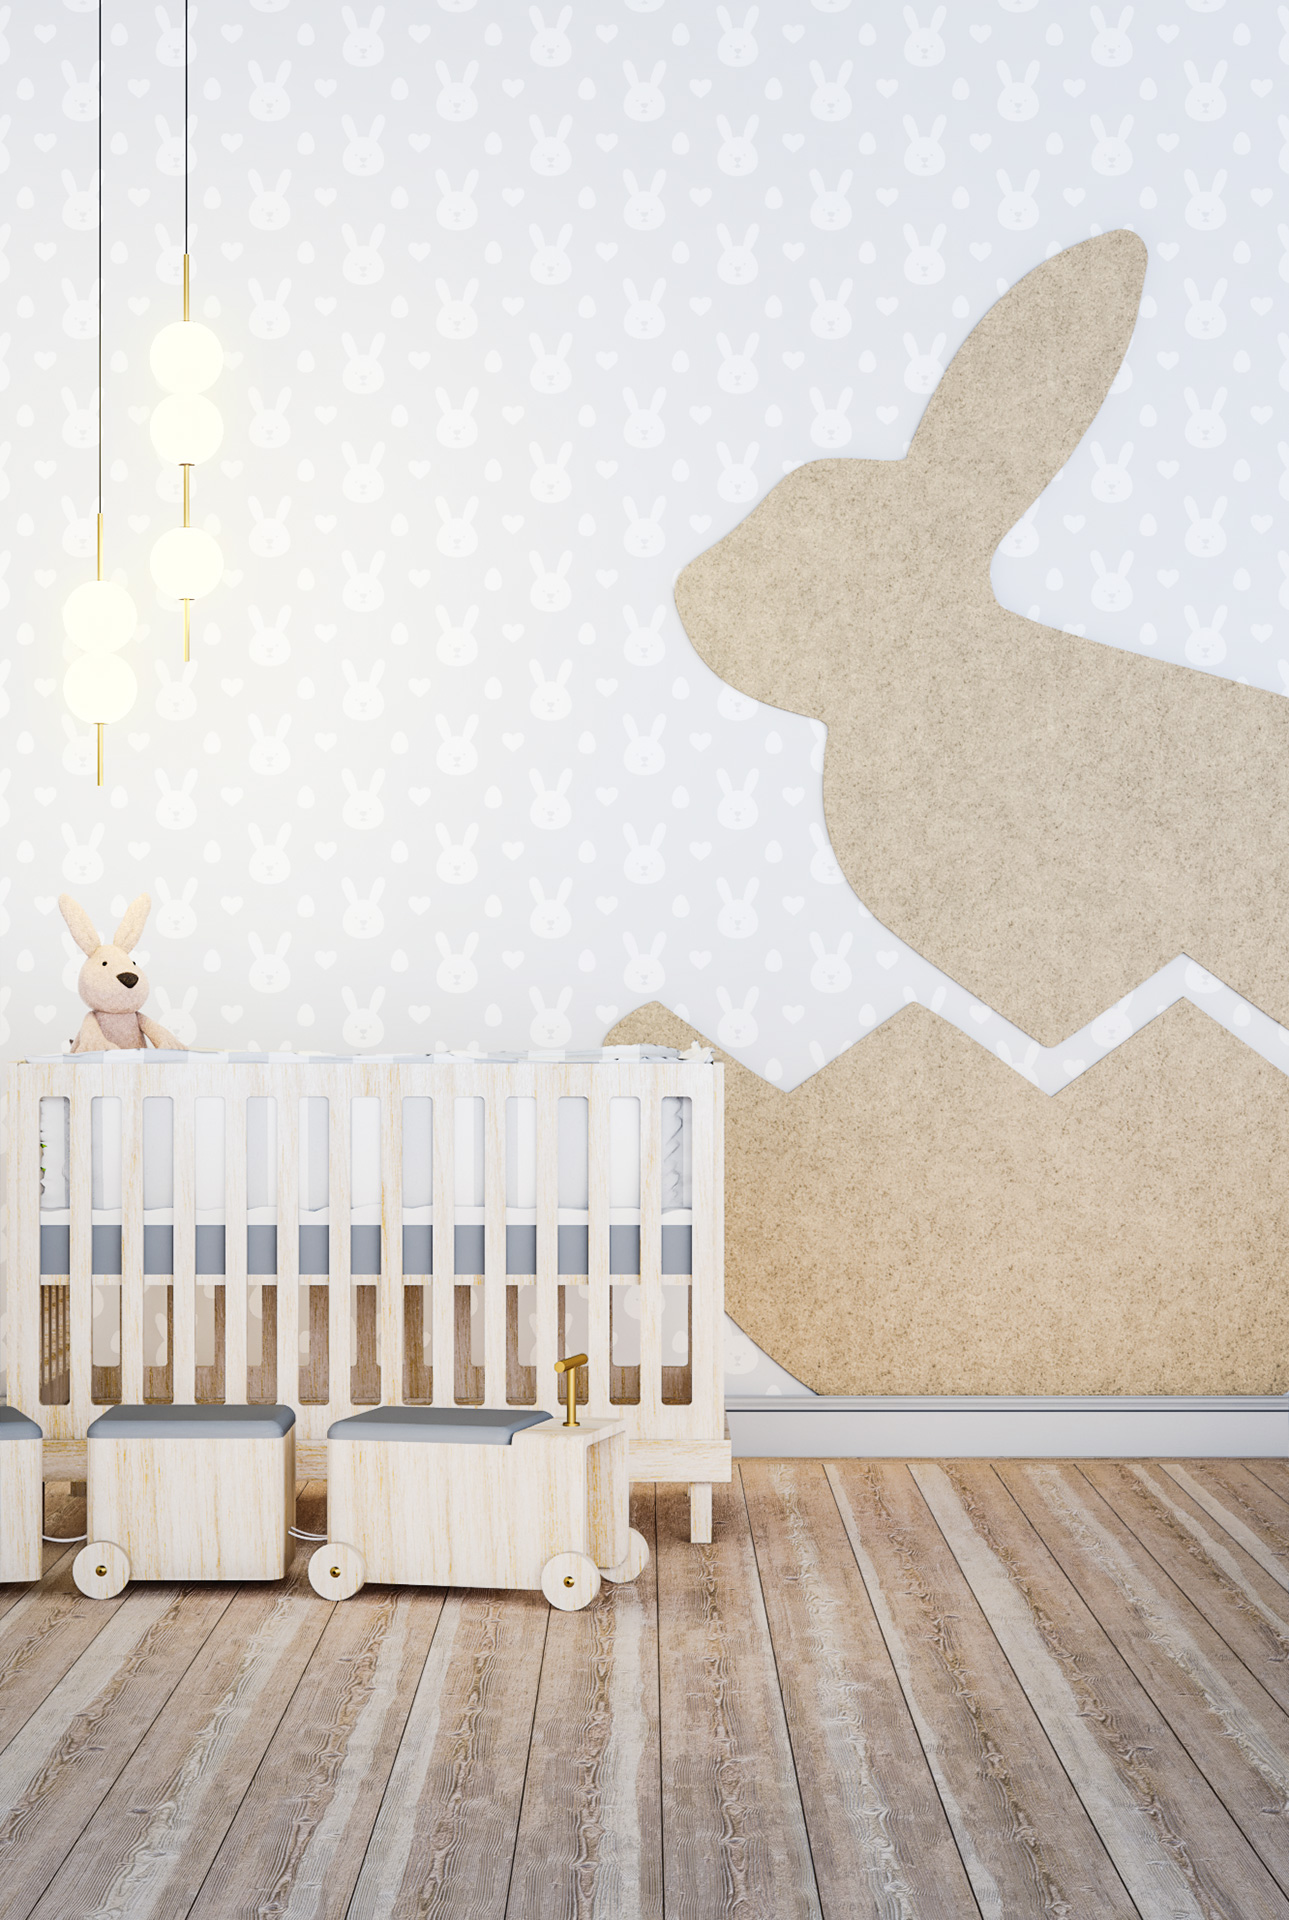 Decorative sound absorbing soft panel for walls in baby room